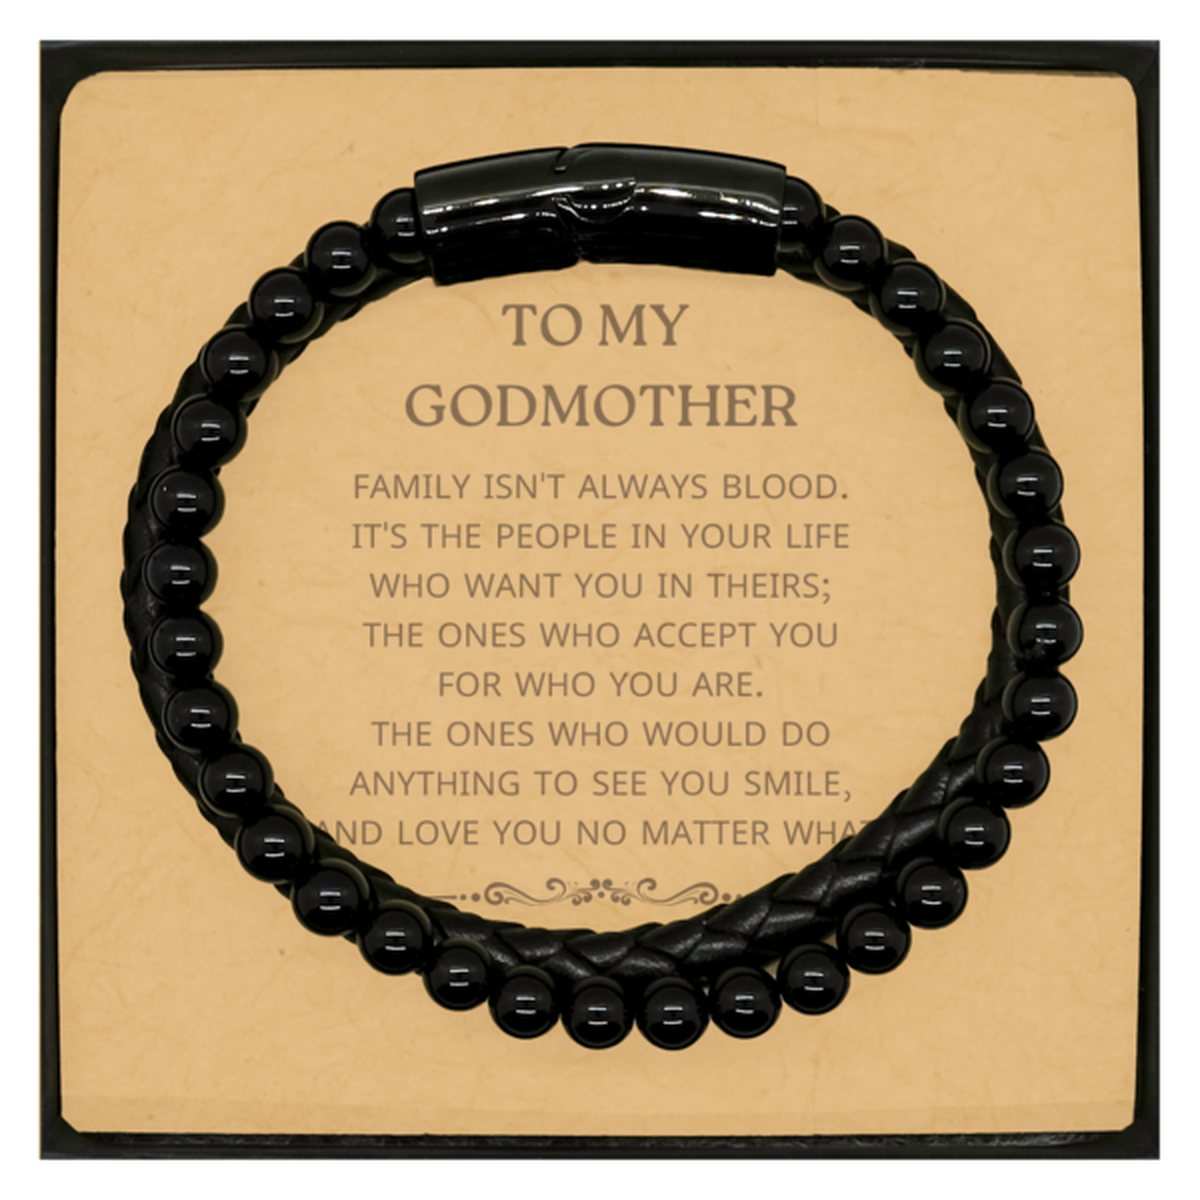 To My Godmother Gifts, Family isn't always blood, Godmother Stone Leather Bracelets, Birthday Christmas Unique Present For Godmother